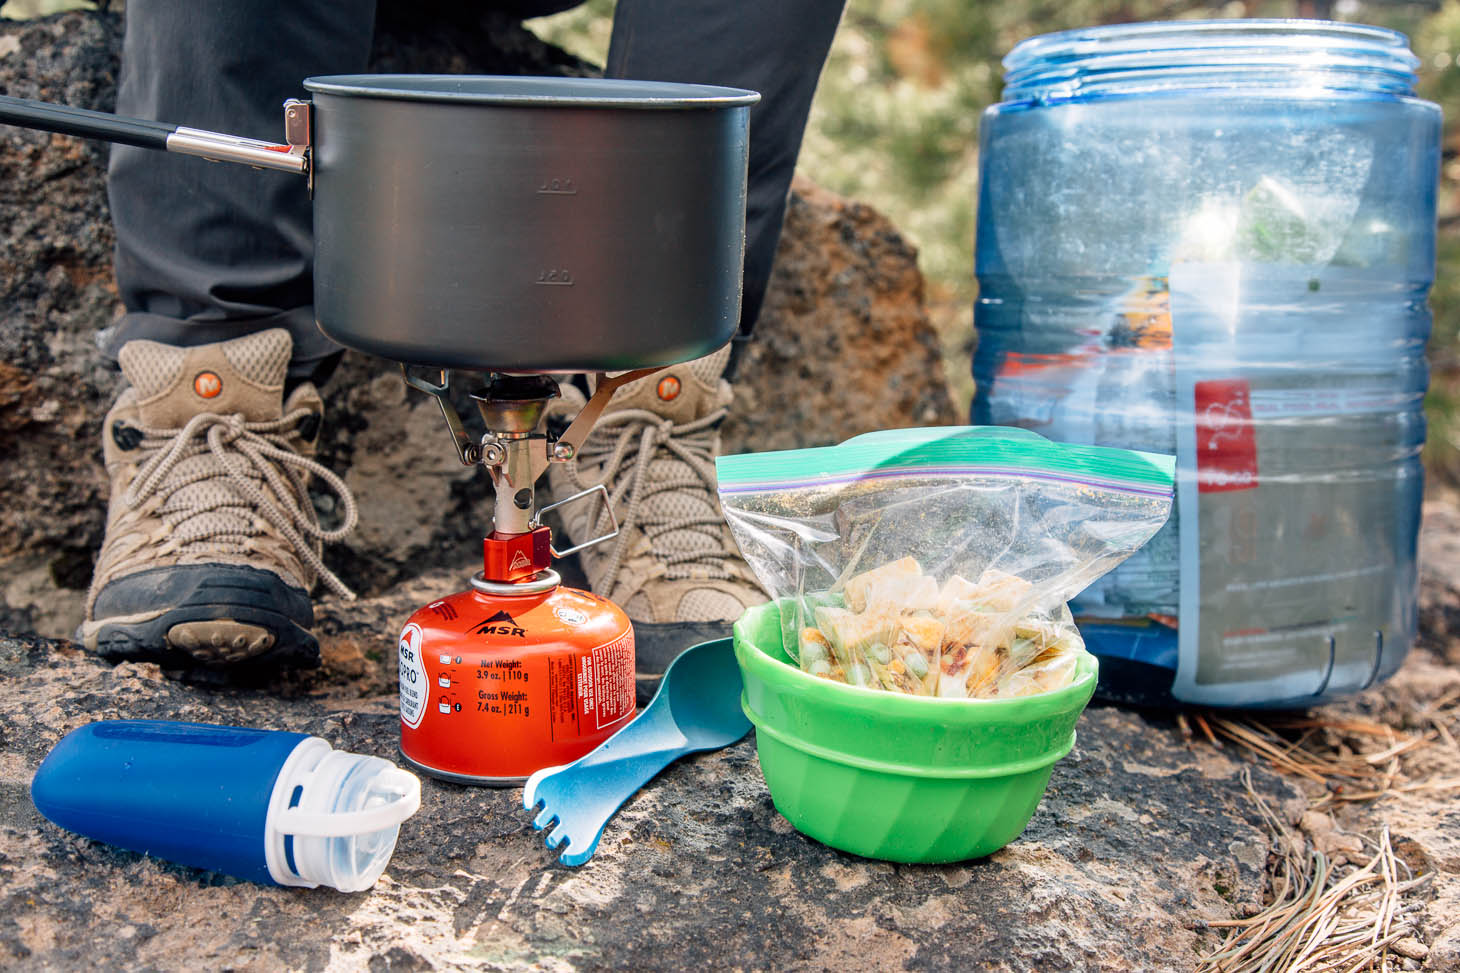 Ingredients and supplies to cook red curry rice while backpacking.